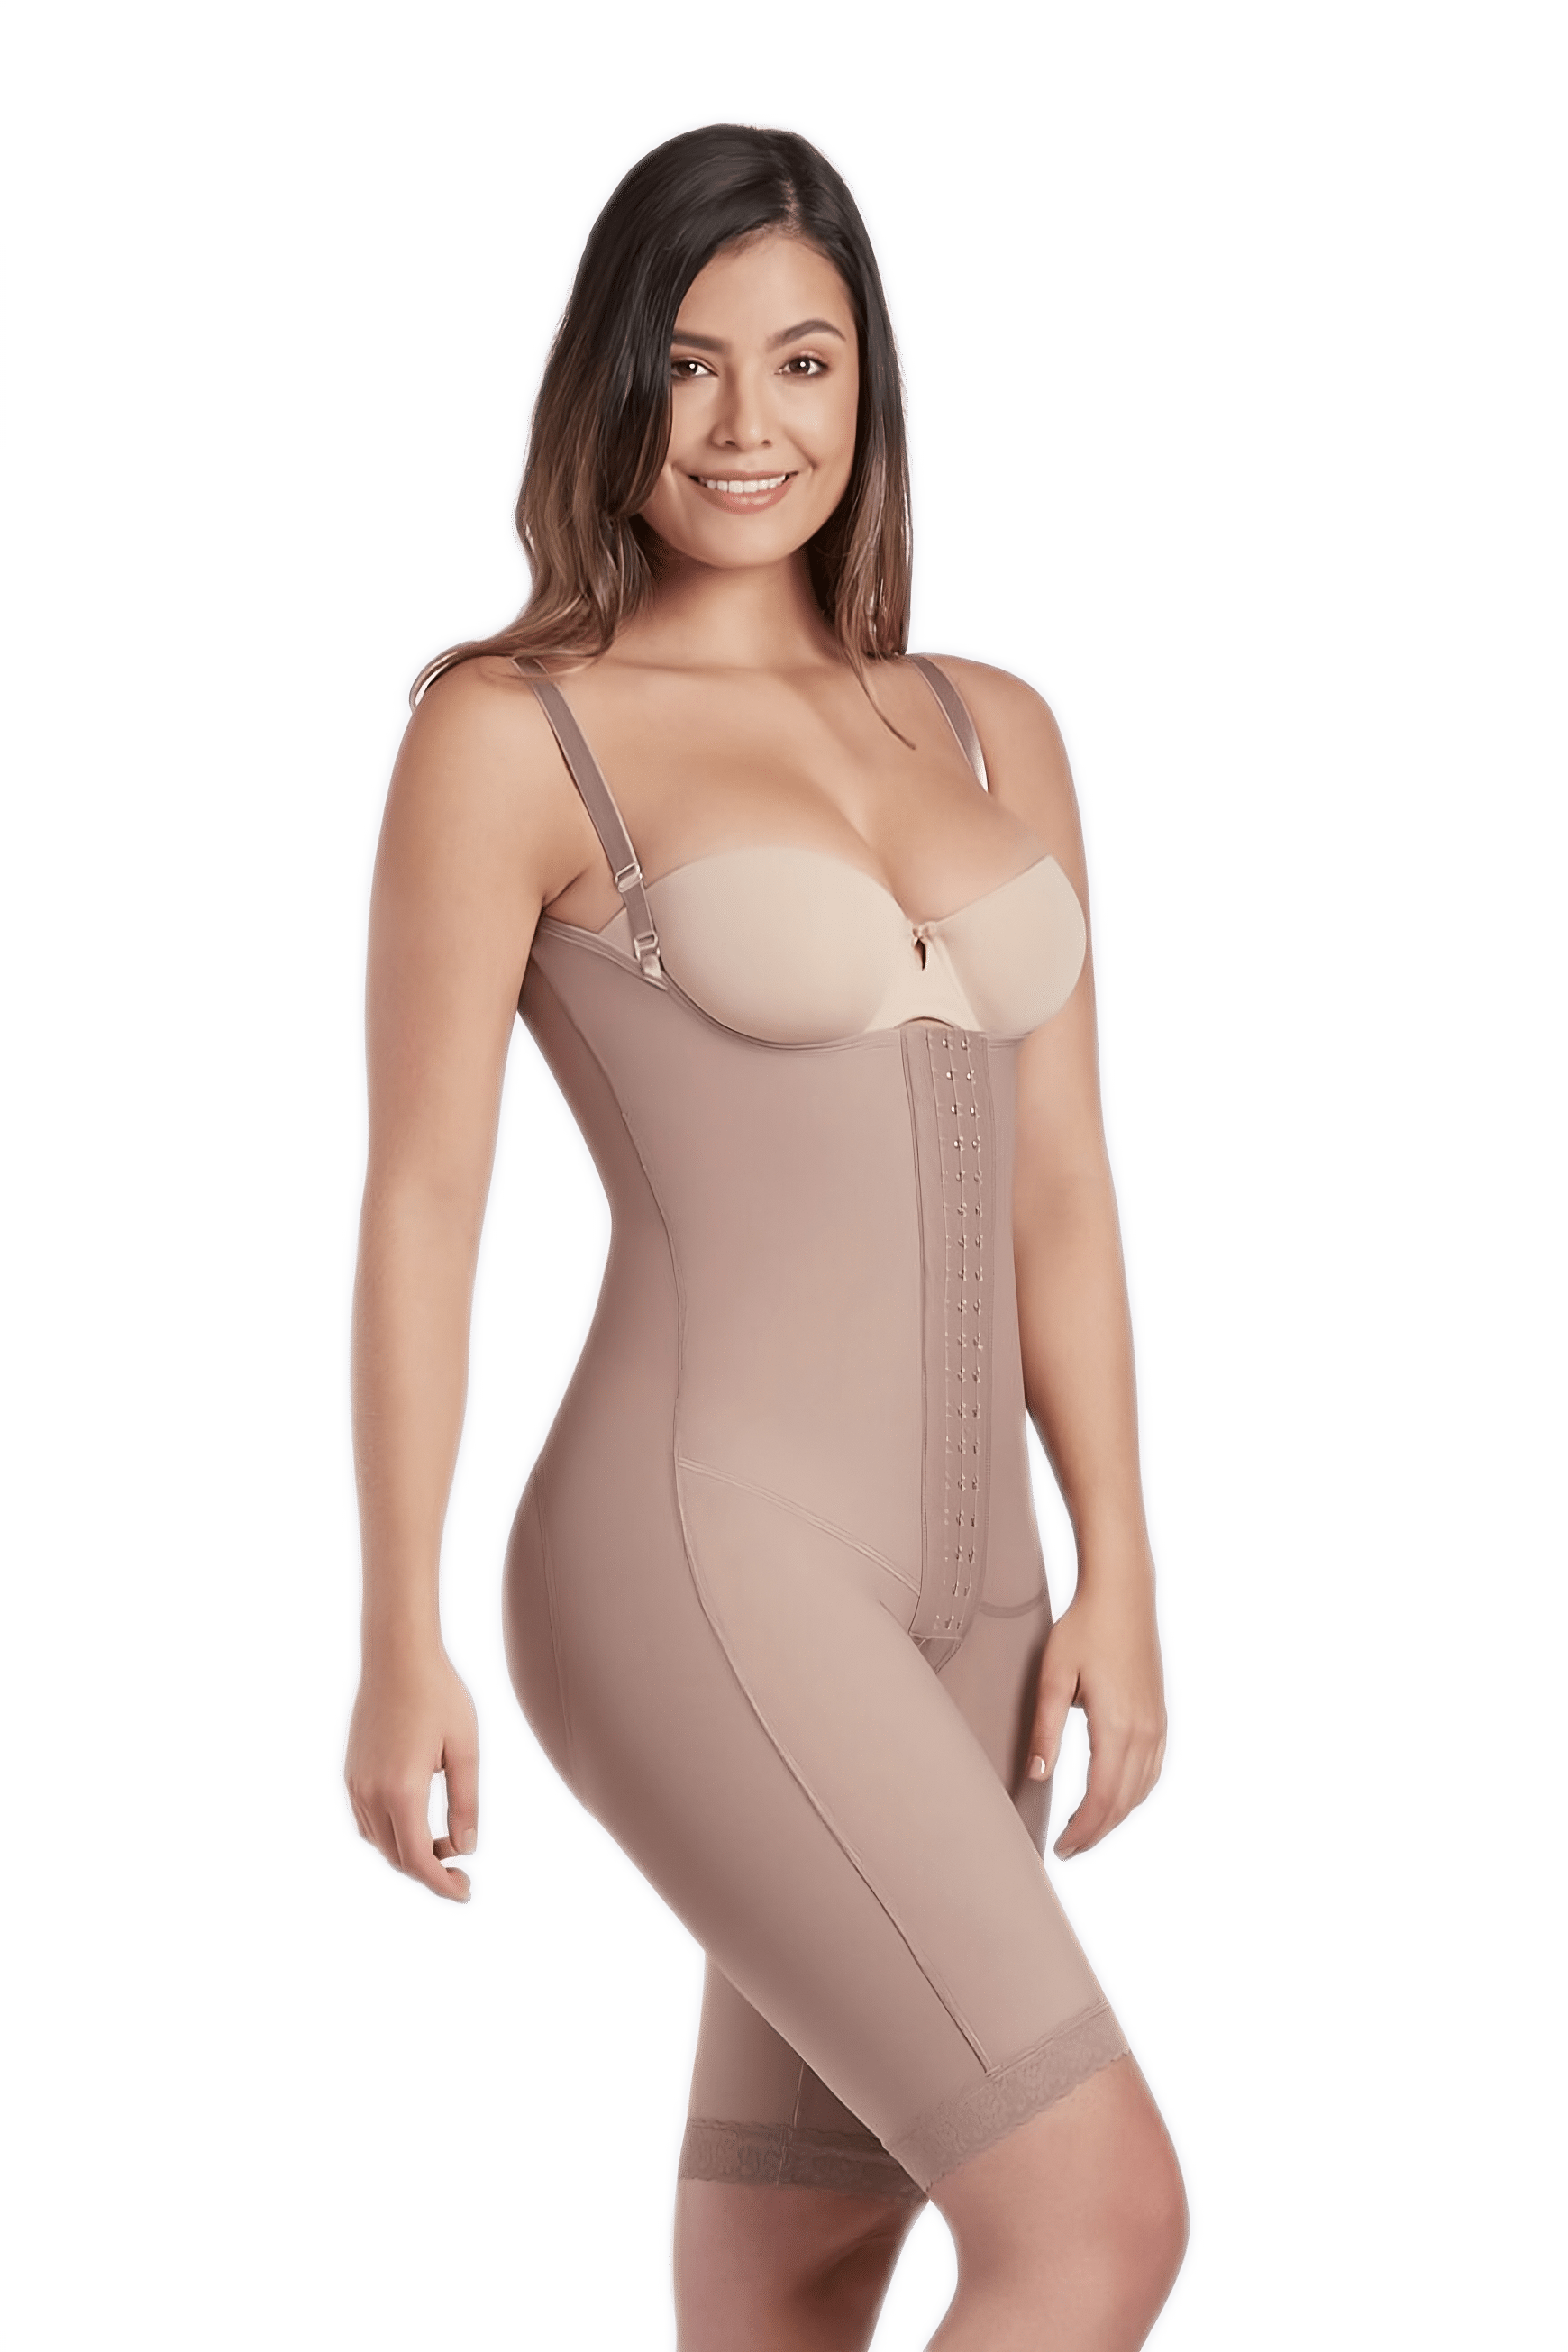 Ily Clothing Shapwear Post Surgical Full Body Shaper